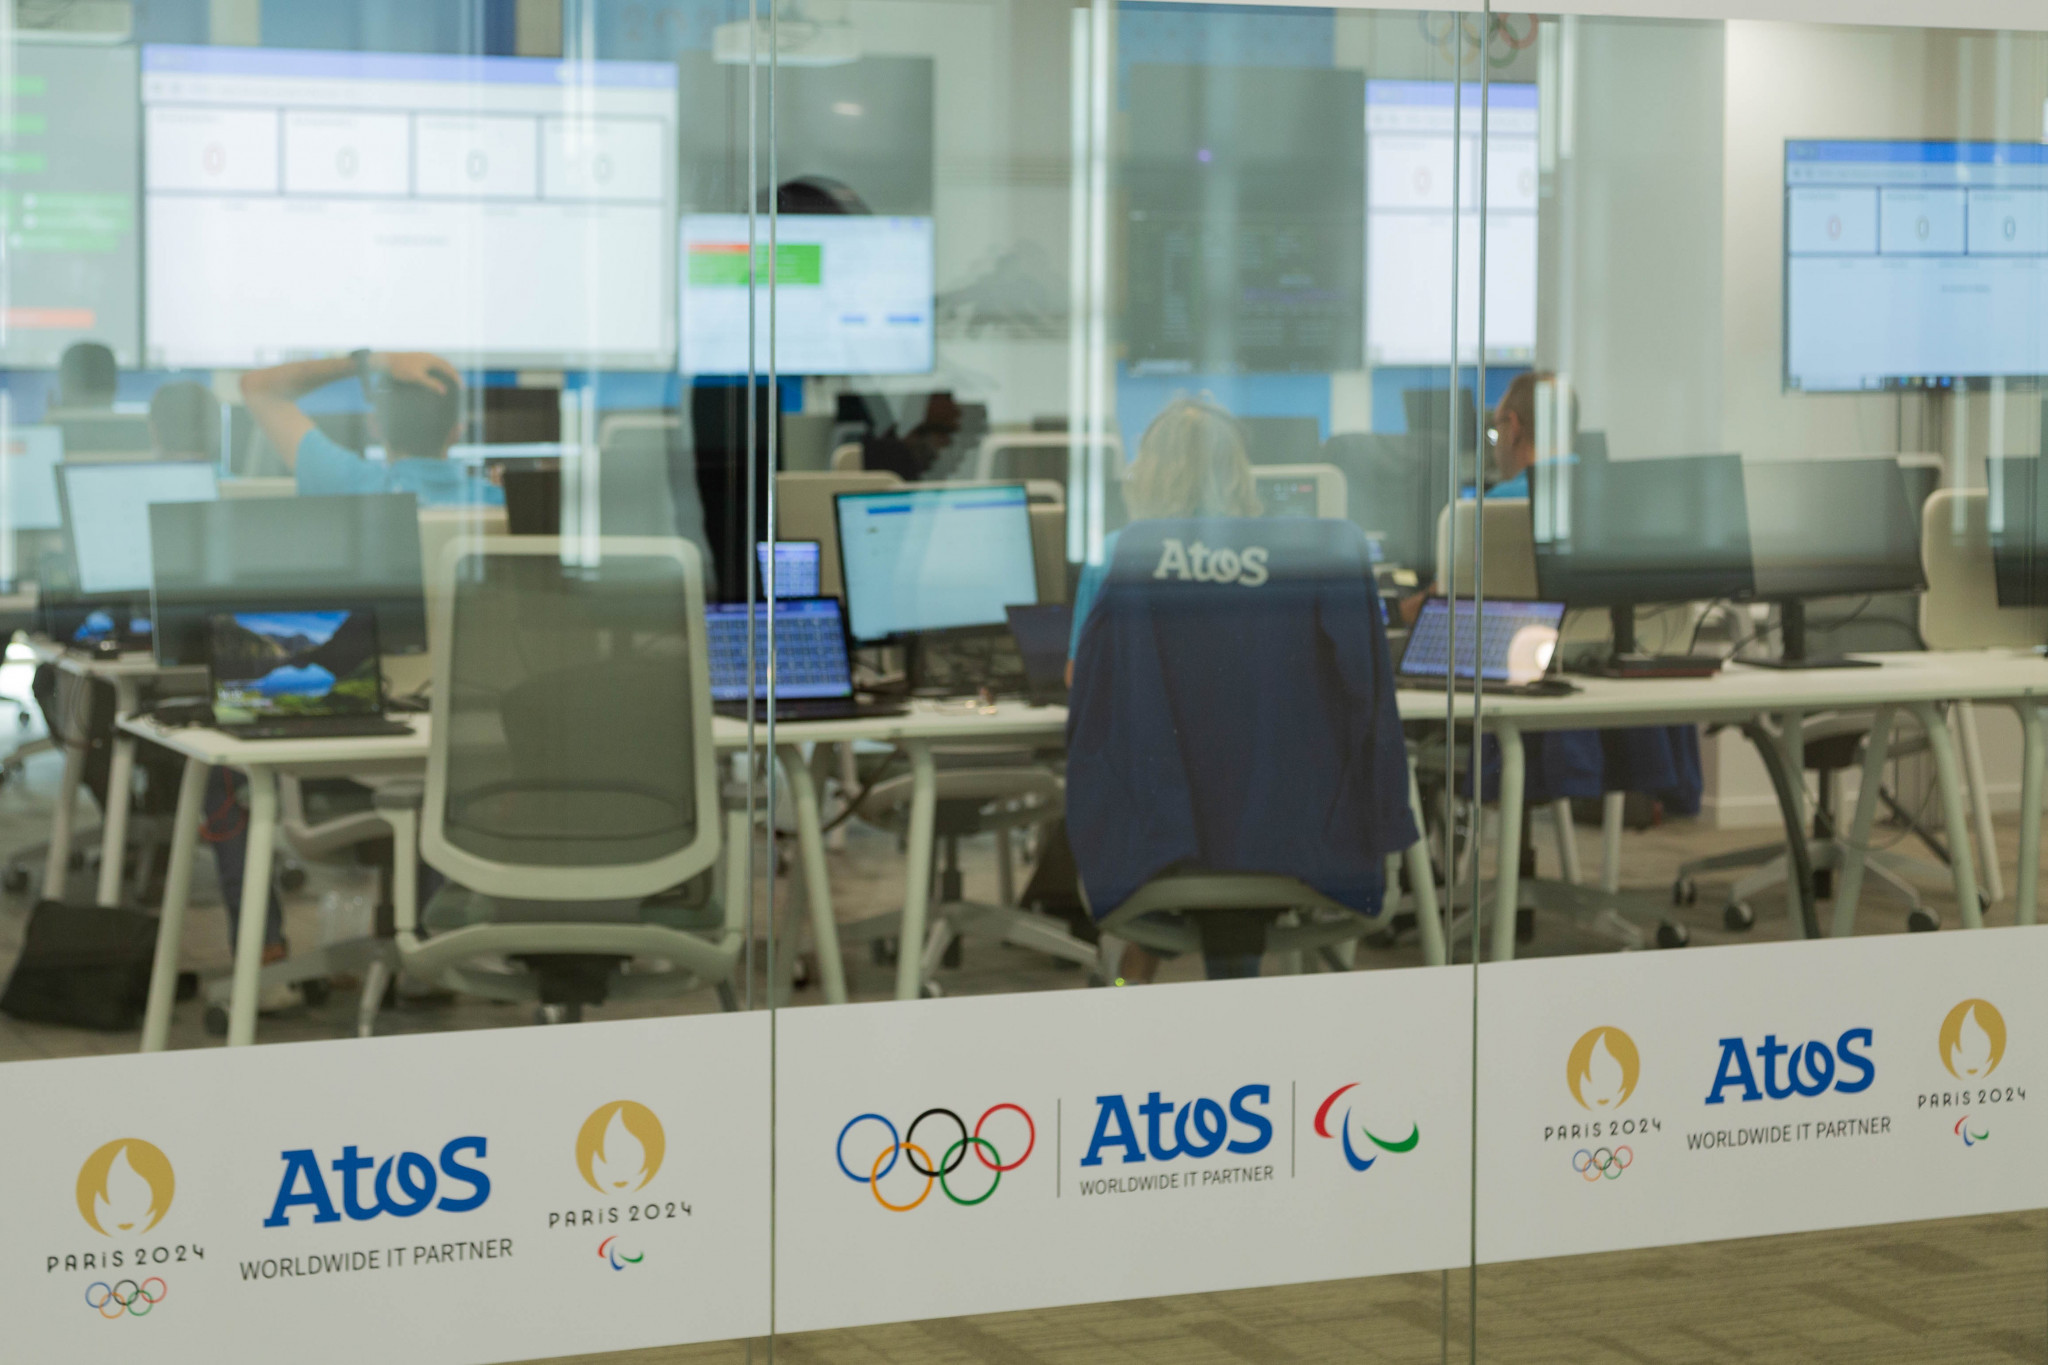 Atos expect to have completed 250,000 hours of testing on technology by the time Paris 2024 opens ©Atos